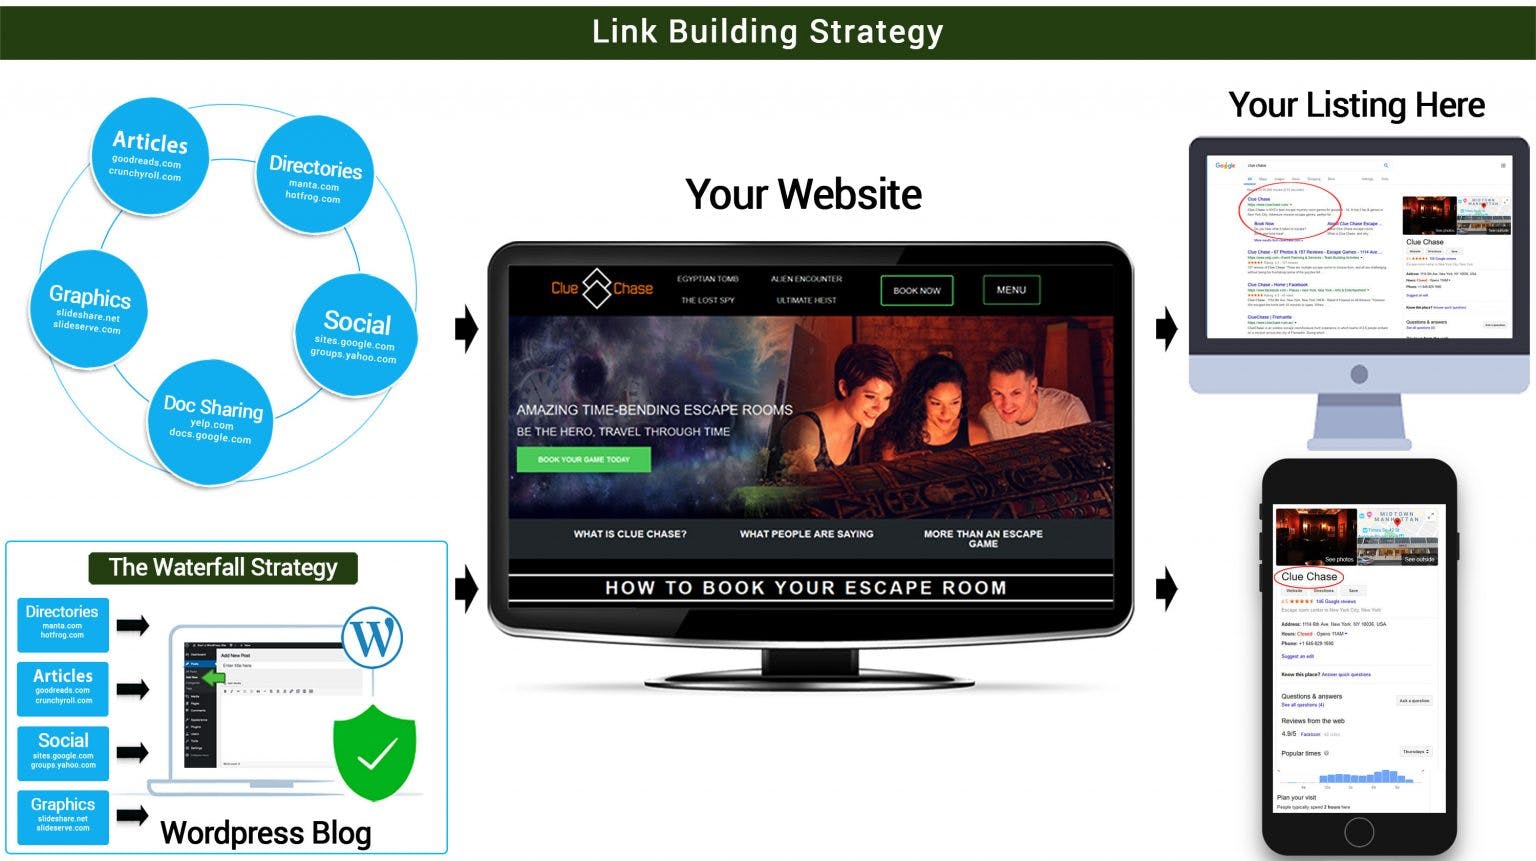 Link-Building-graphic-1536x861.jpg